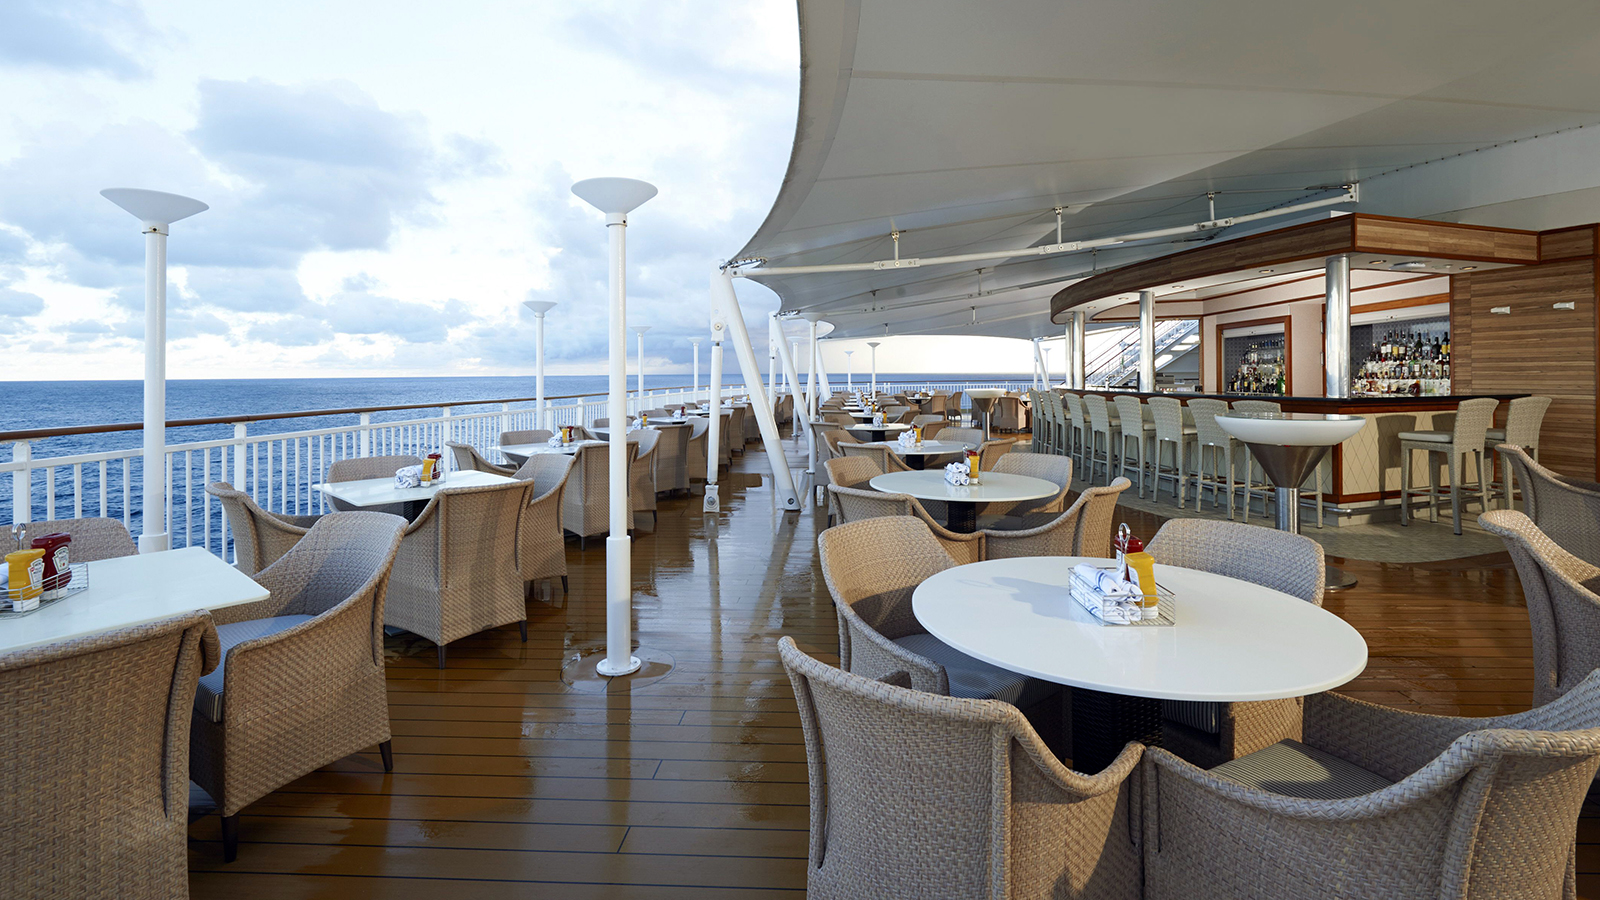 The Great Outdoors on the Norwegian Jade